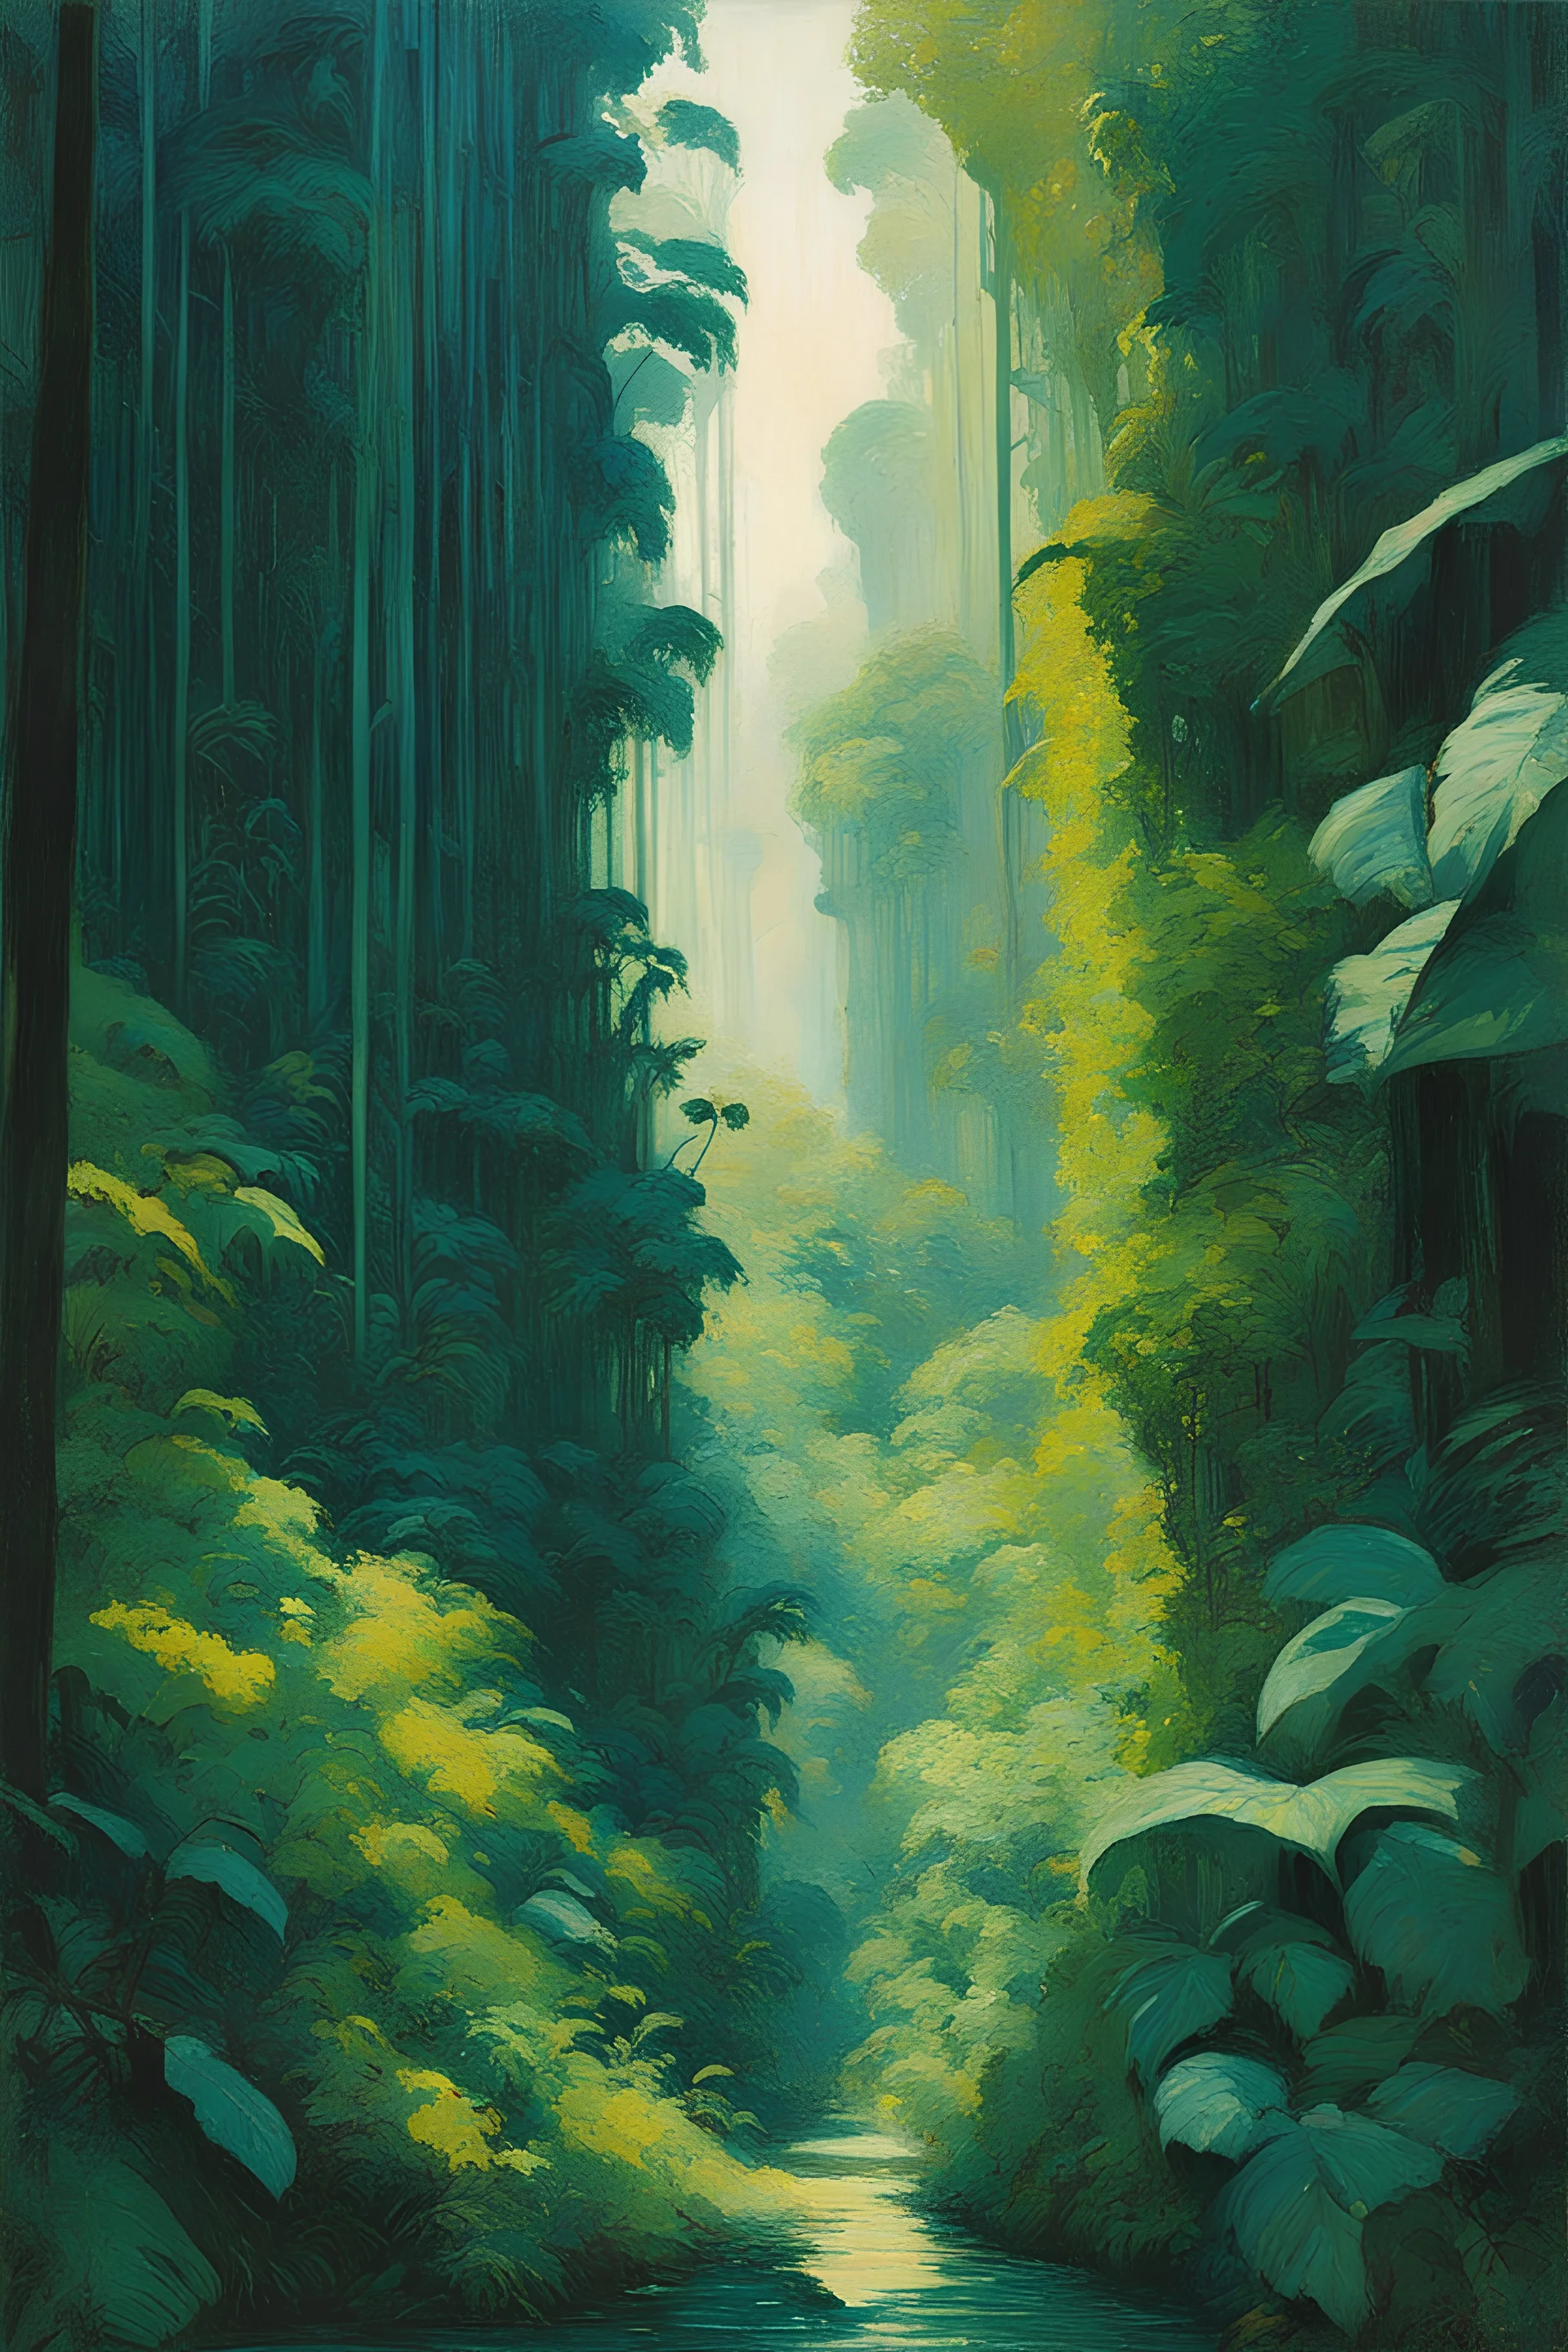 [Kupka] Driven by an unexplained urge, Dorothy followed her instincts, venturing outside the city limits and into the dense jungle that surrounded it. The lush vegetation stretched as far as the eye could see, a stark contrast to the metal and glass jungle she called home. The cyberpunk world seemed distant here, replaced by the vastness of nature. Vines, trees and exotic plants formed a tangled web all around her. Birds of vibrant plumage called from the canopy high above. Strange insectoid buz